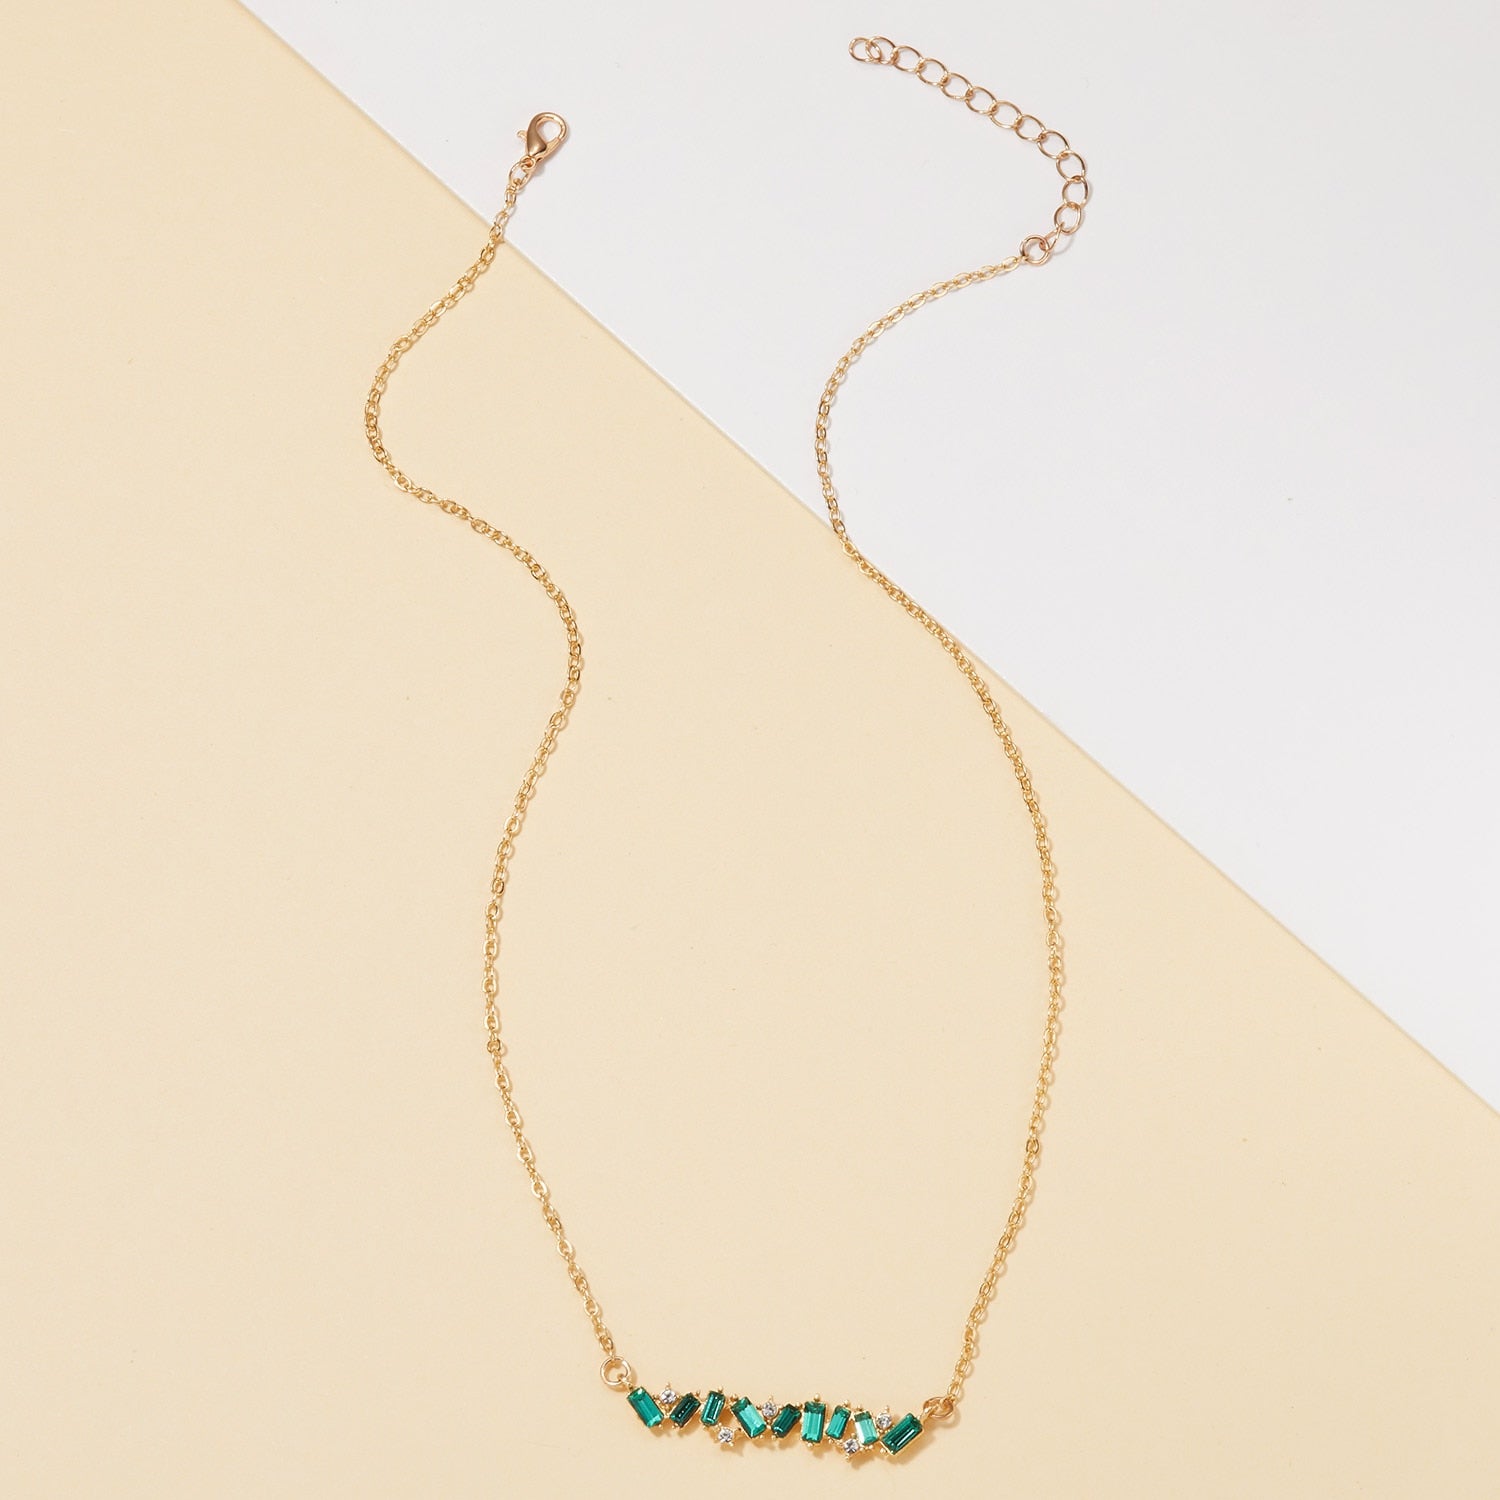 Green Baguette Chain Necklace